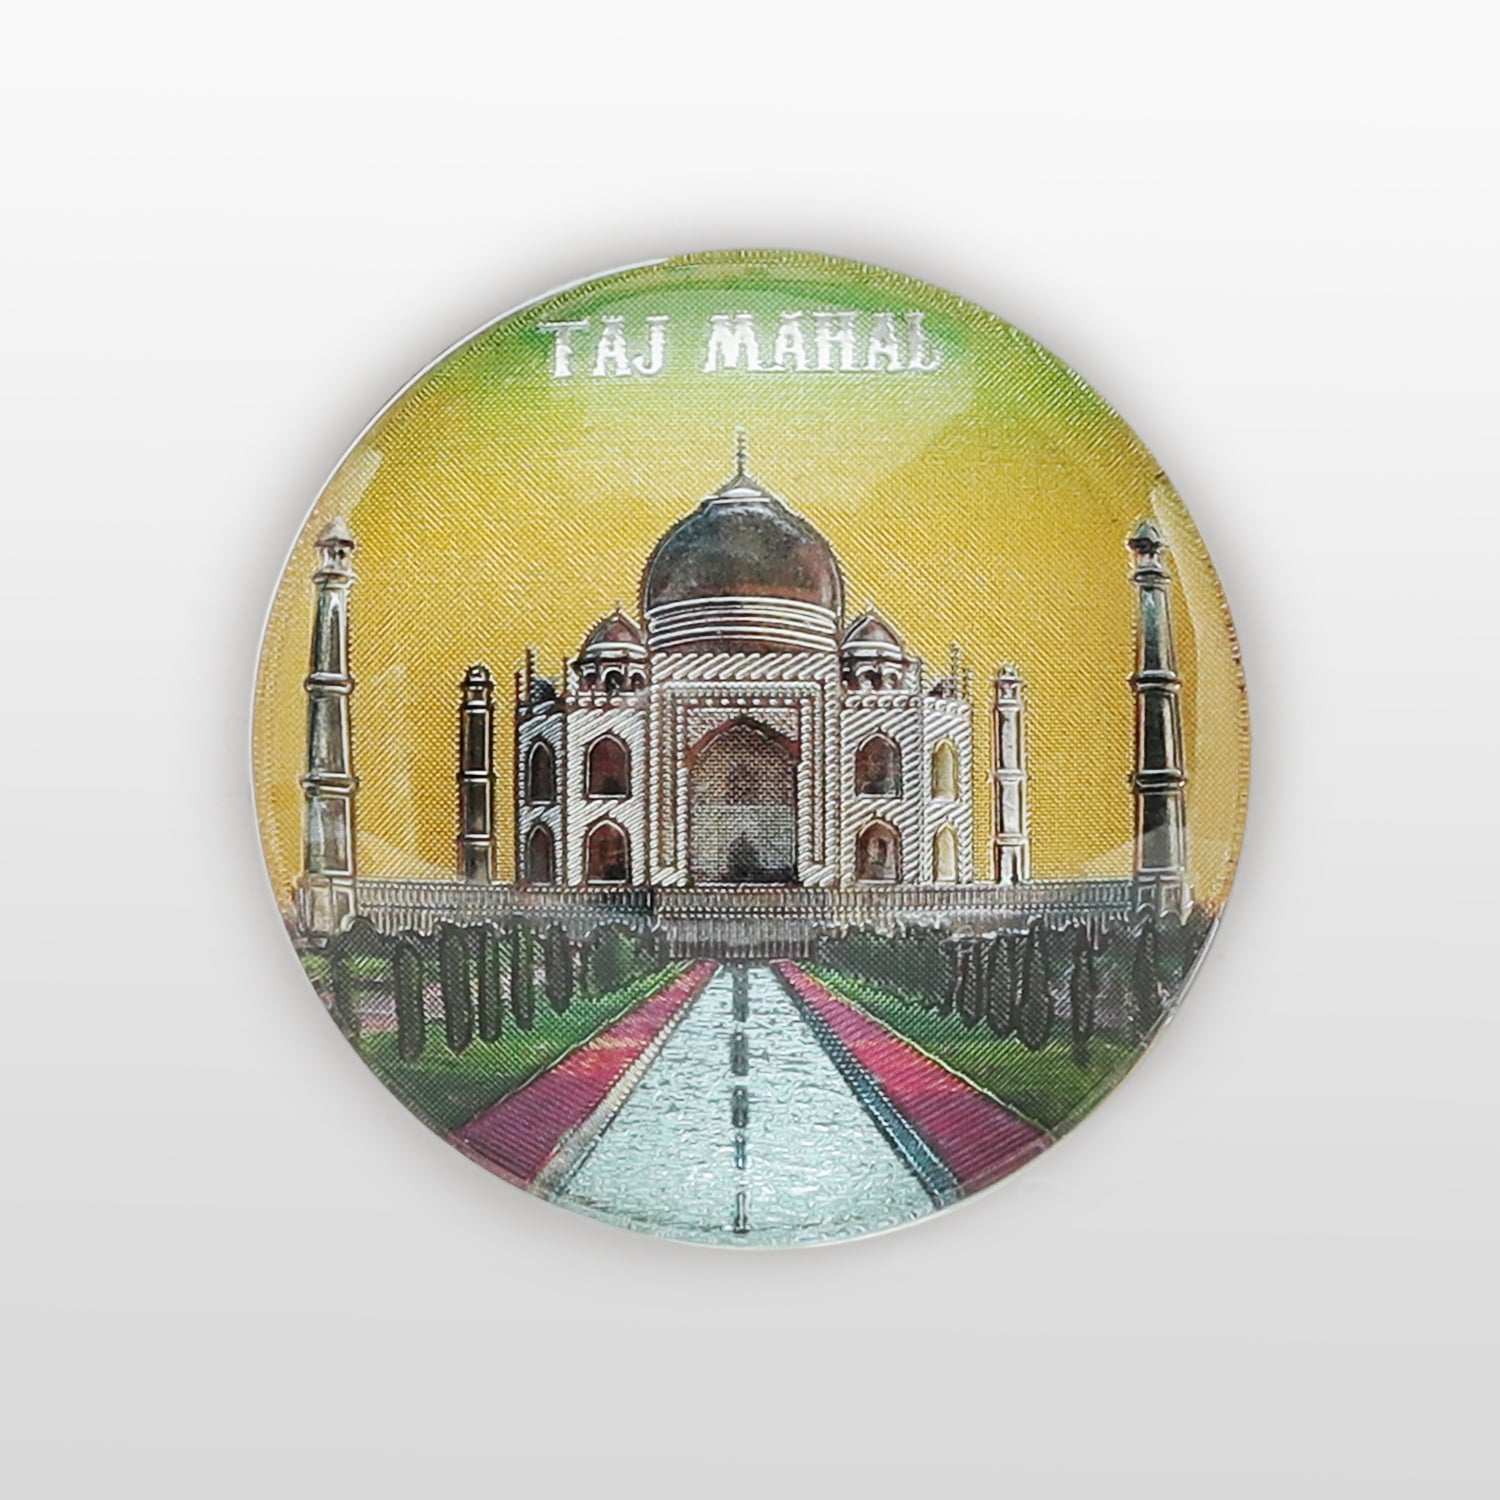 The Bombay Store Round Fridge Magnet Set of 4 in Metal